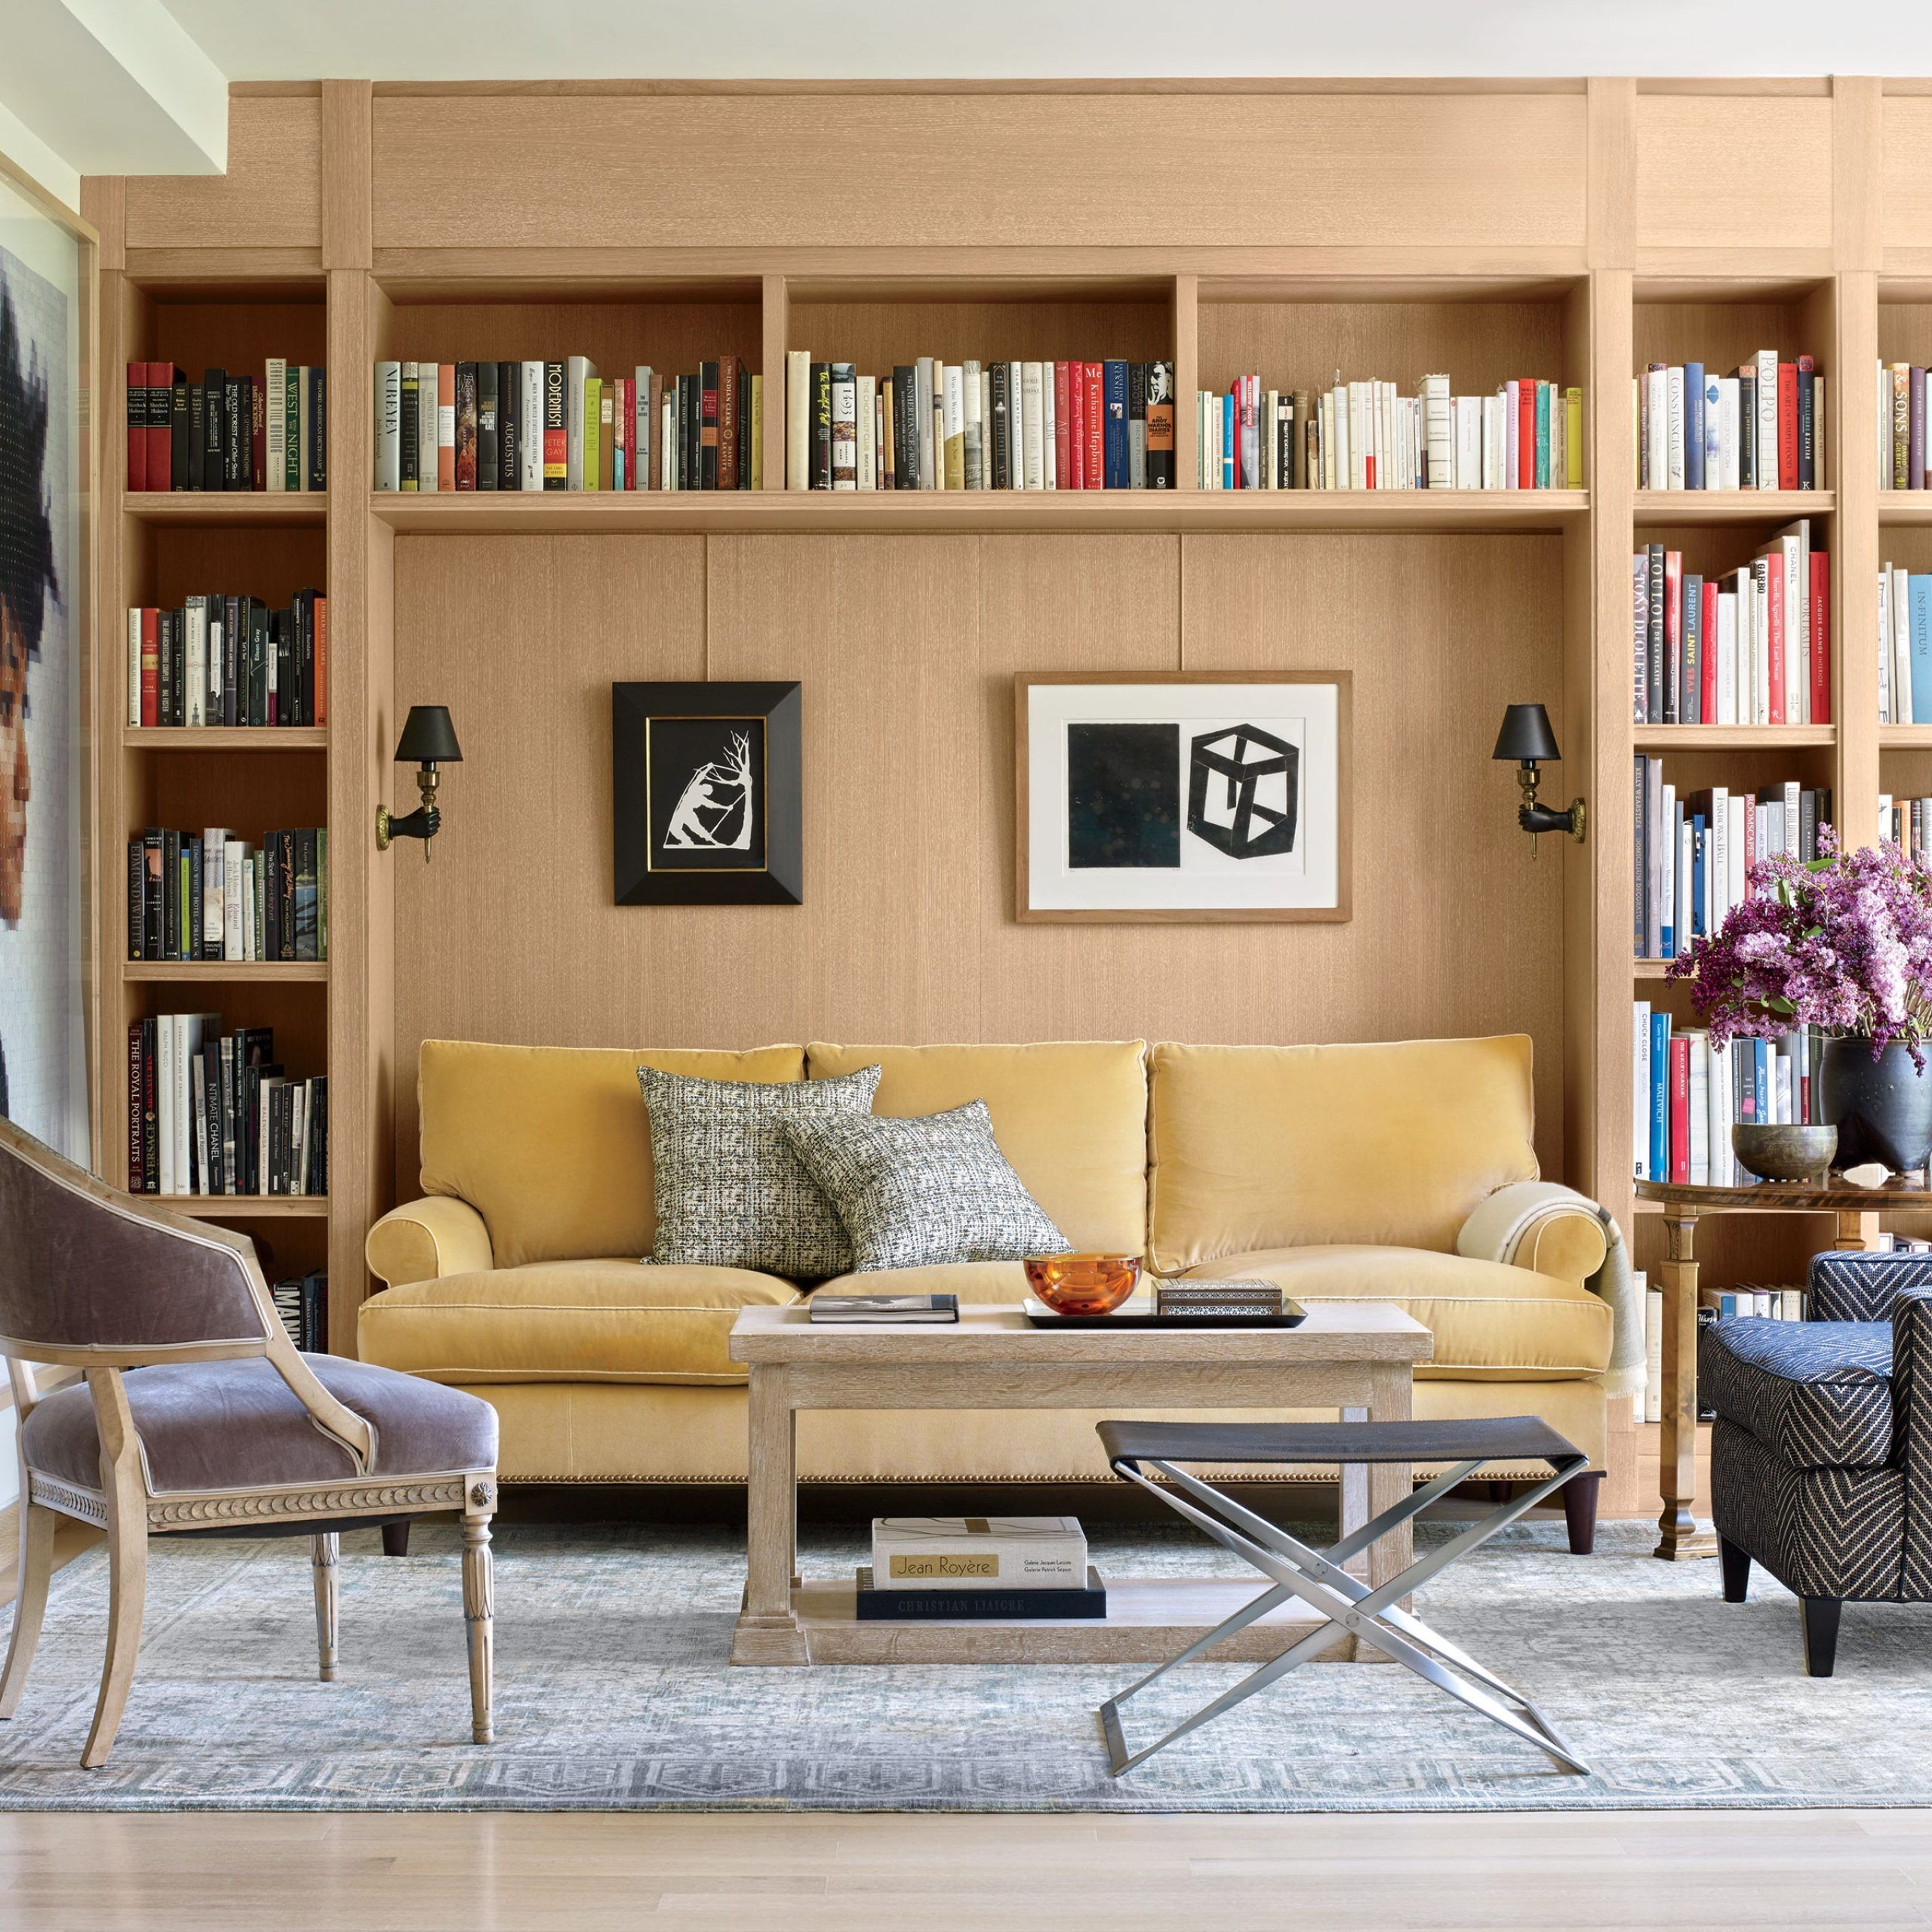 How To Decorate A Bookshelf: 25 Stylish Design Tips For Your Bookcases |  Architectural Digest Pertaining To Mirrored Bookcases With 3 Shelves (Photo 11 of 15)